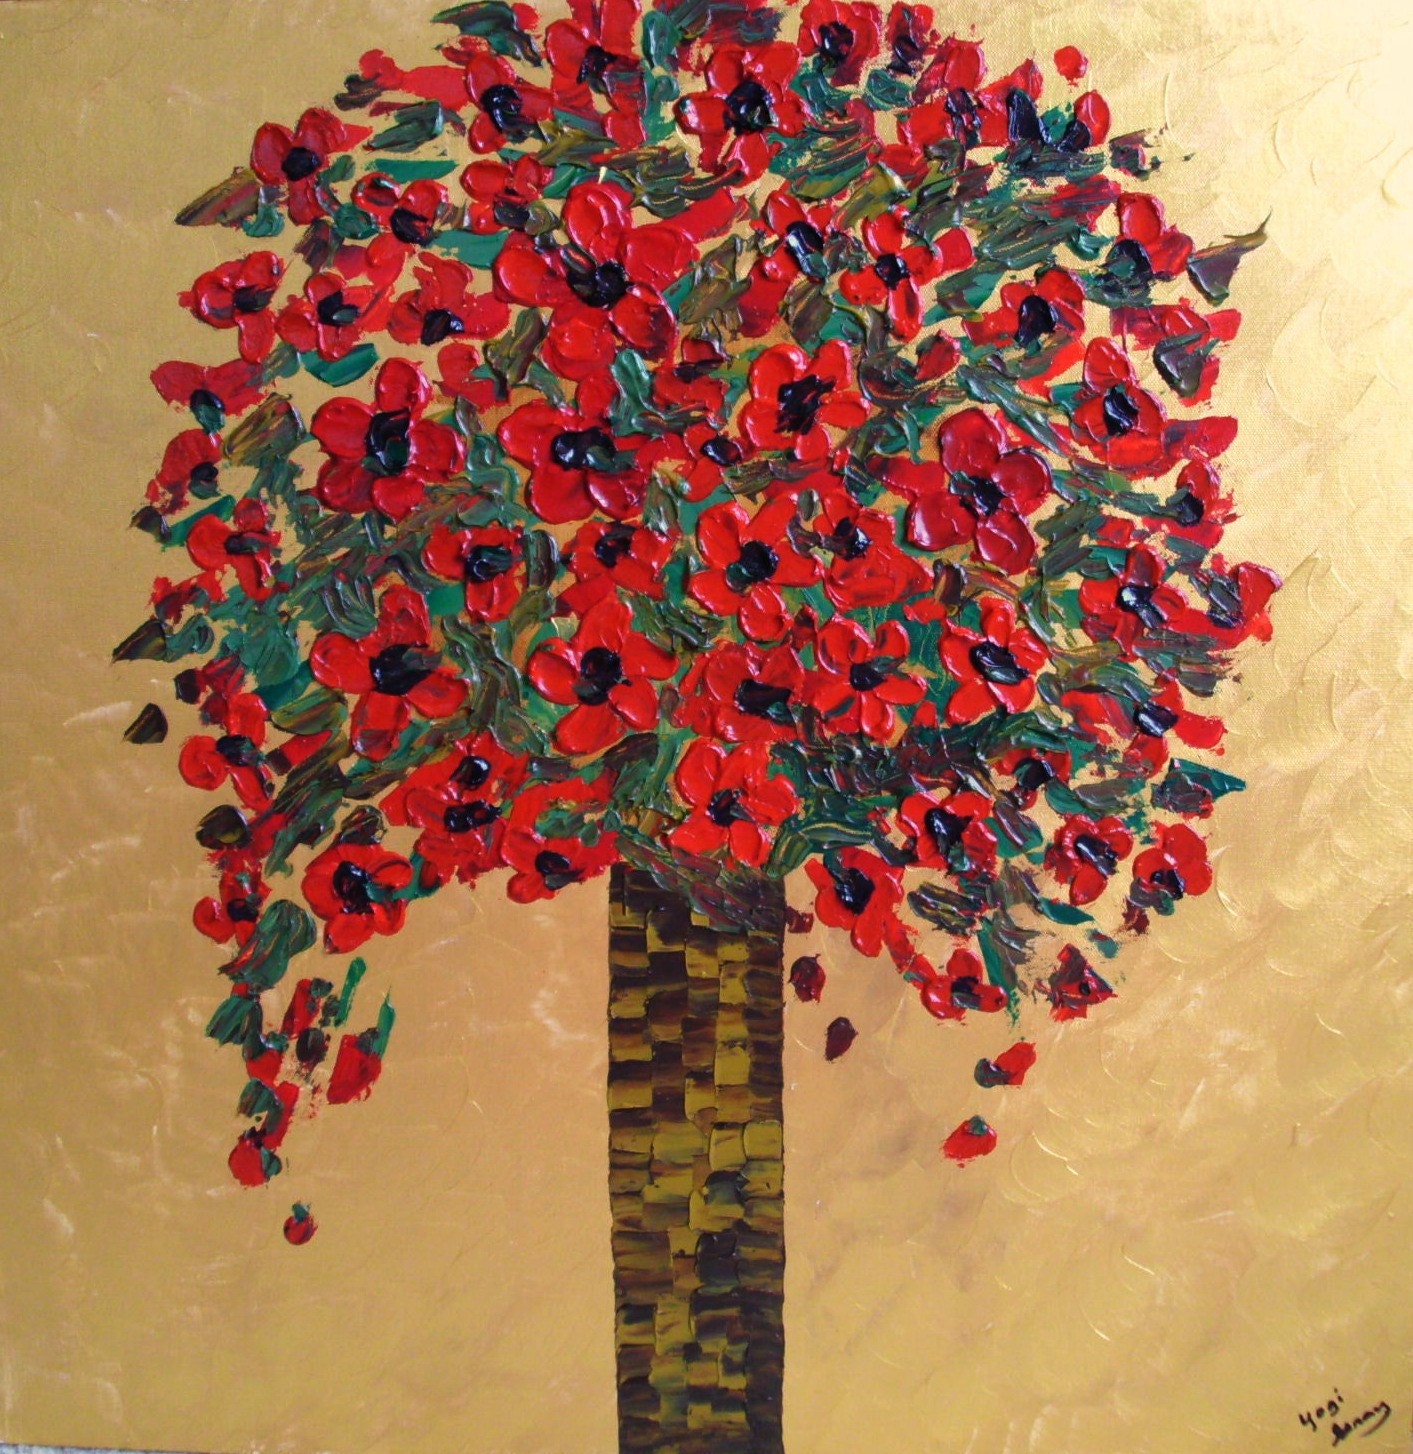 Original Palette Knife Painting on Canvas 24x24 Red Poppies in Vase Commission